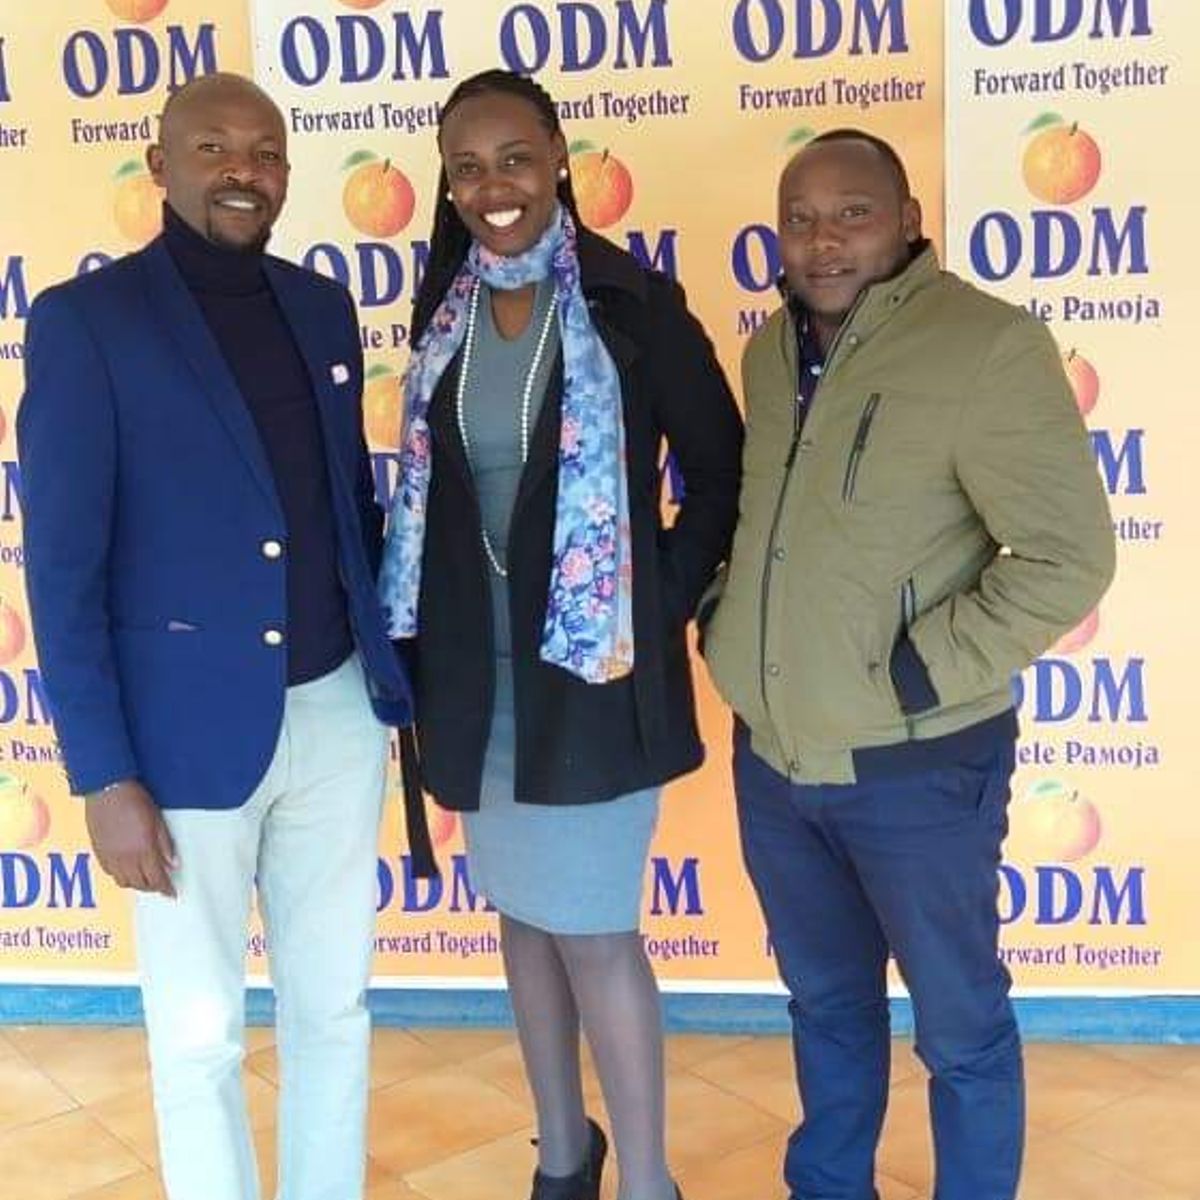 ODM politician reacts over swearing-in of Ms Mayaka